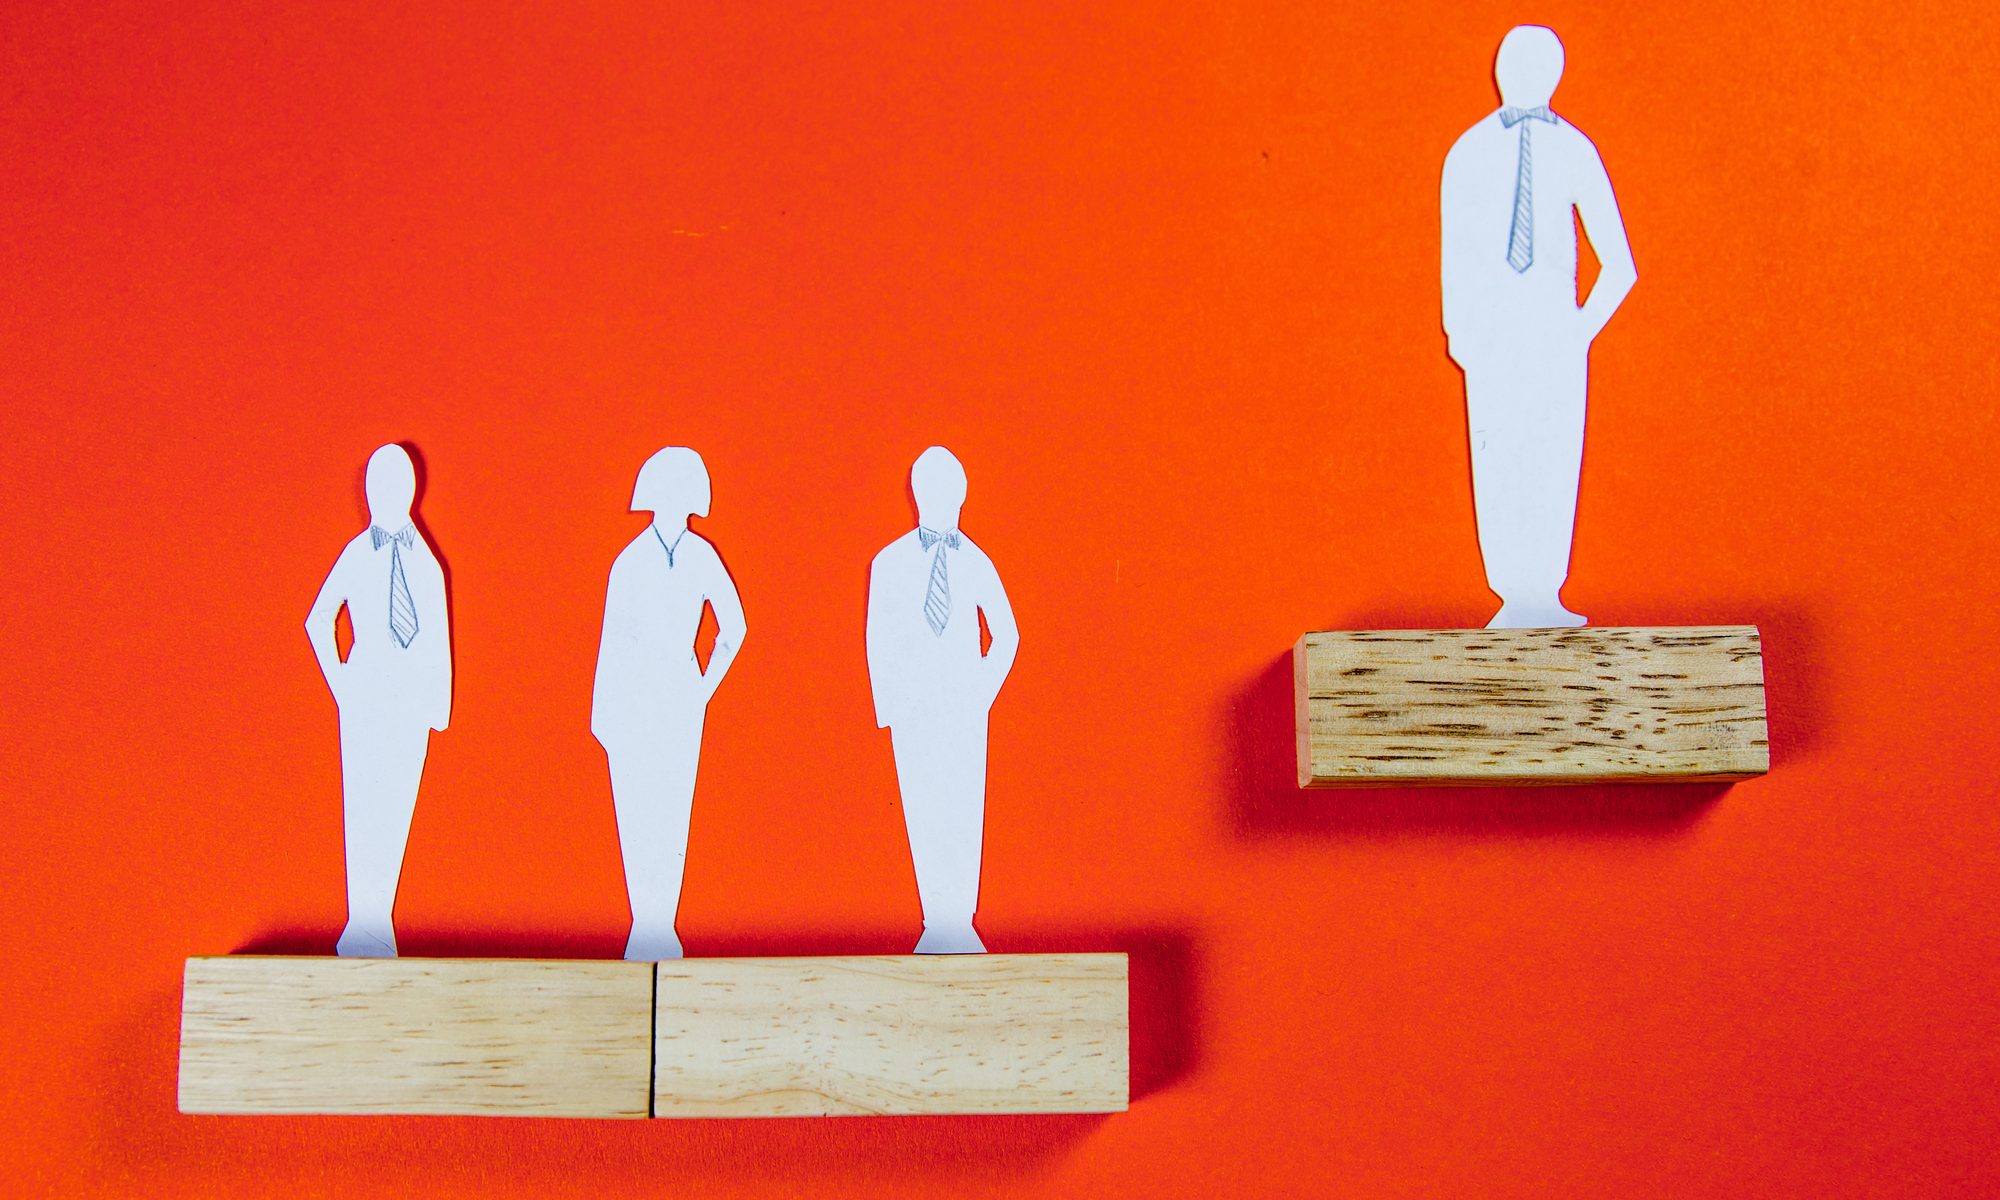 cutout of white man on corporate ladder elevated above peers